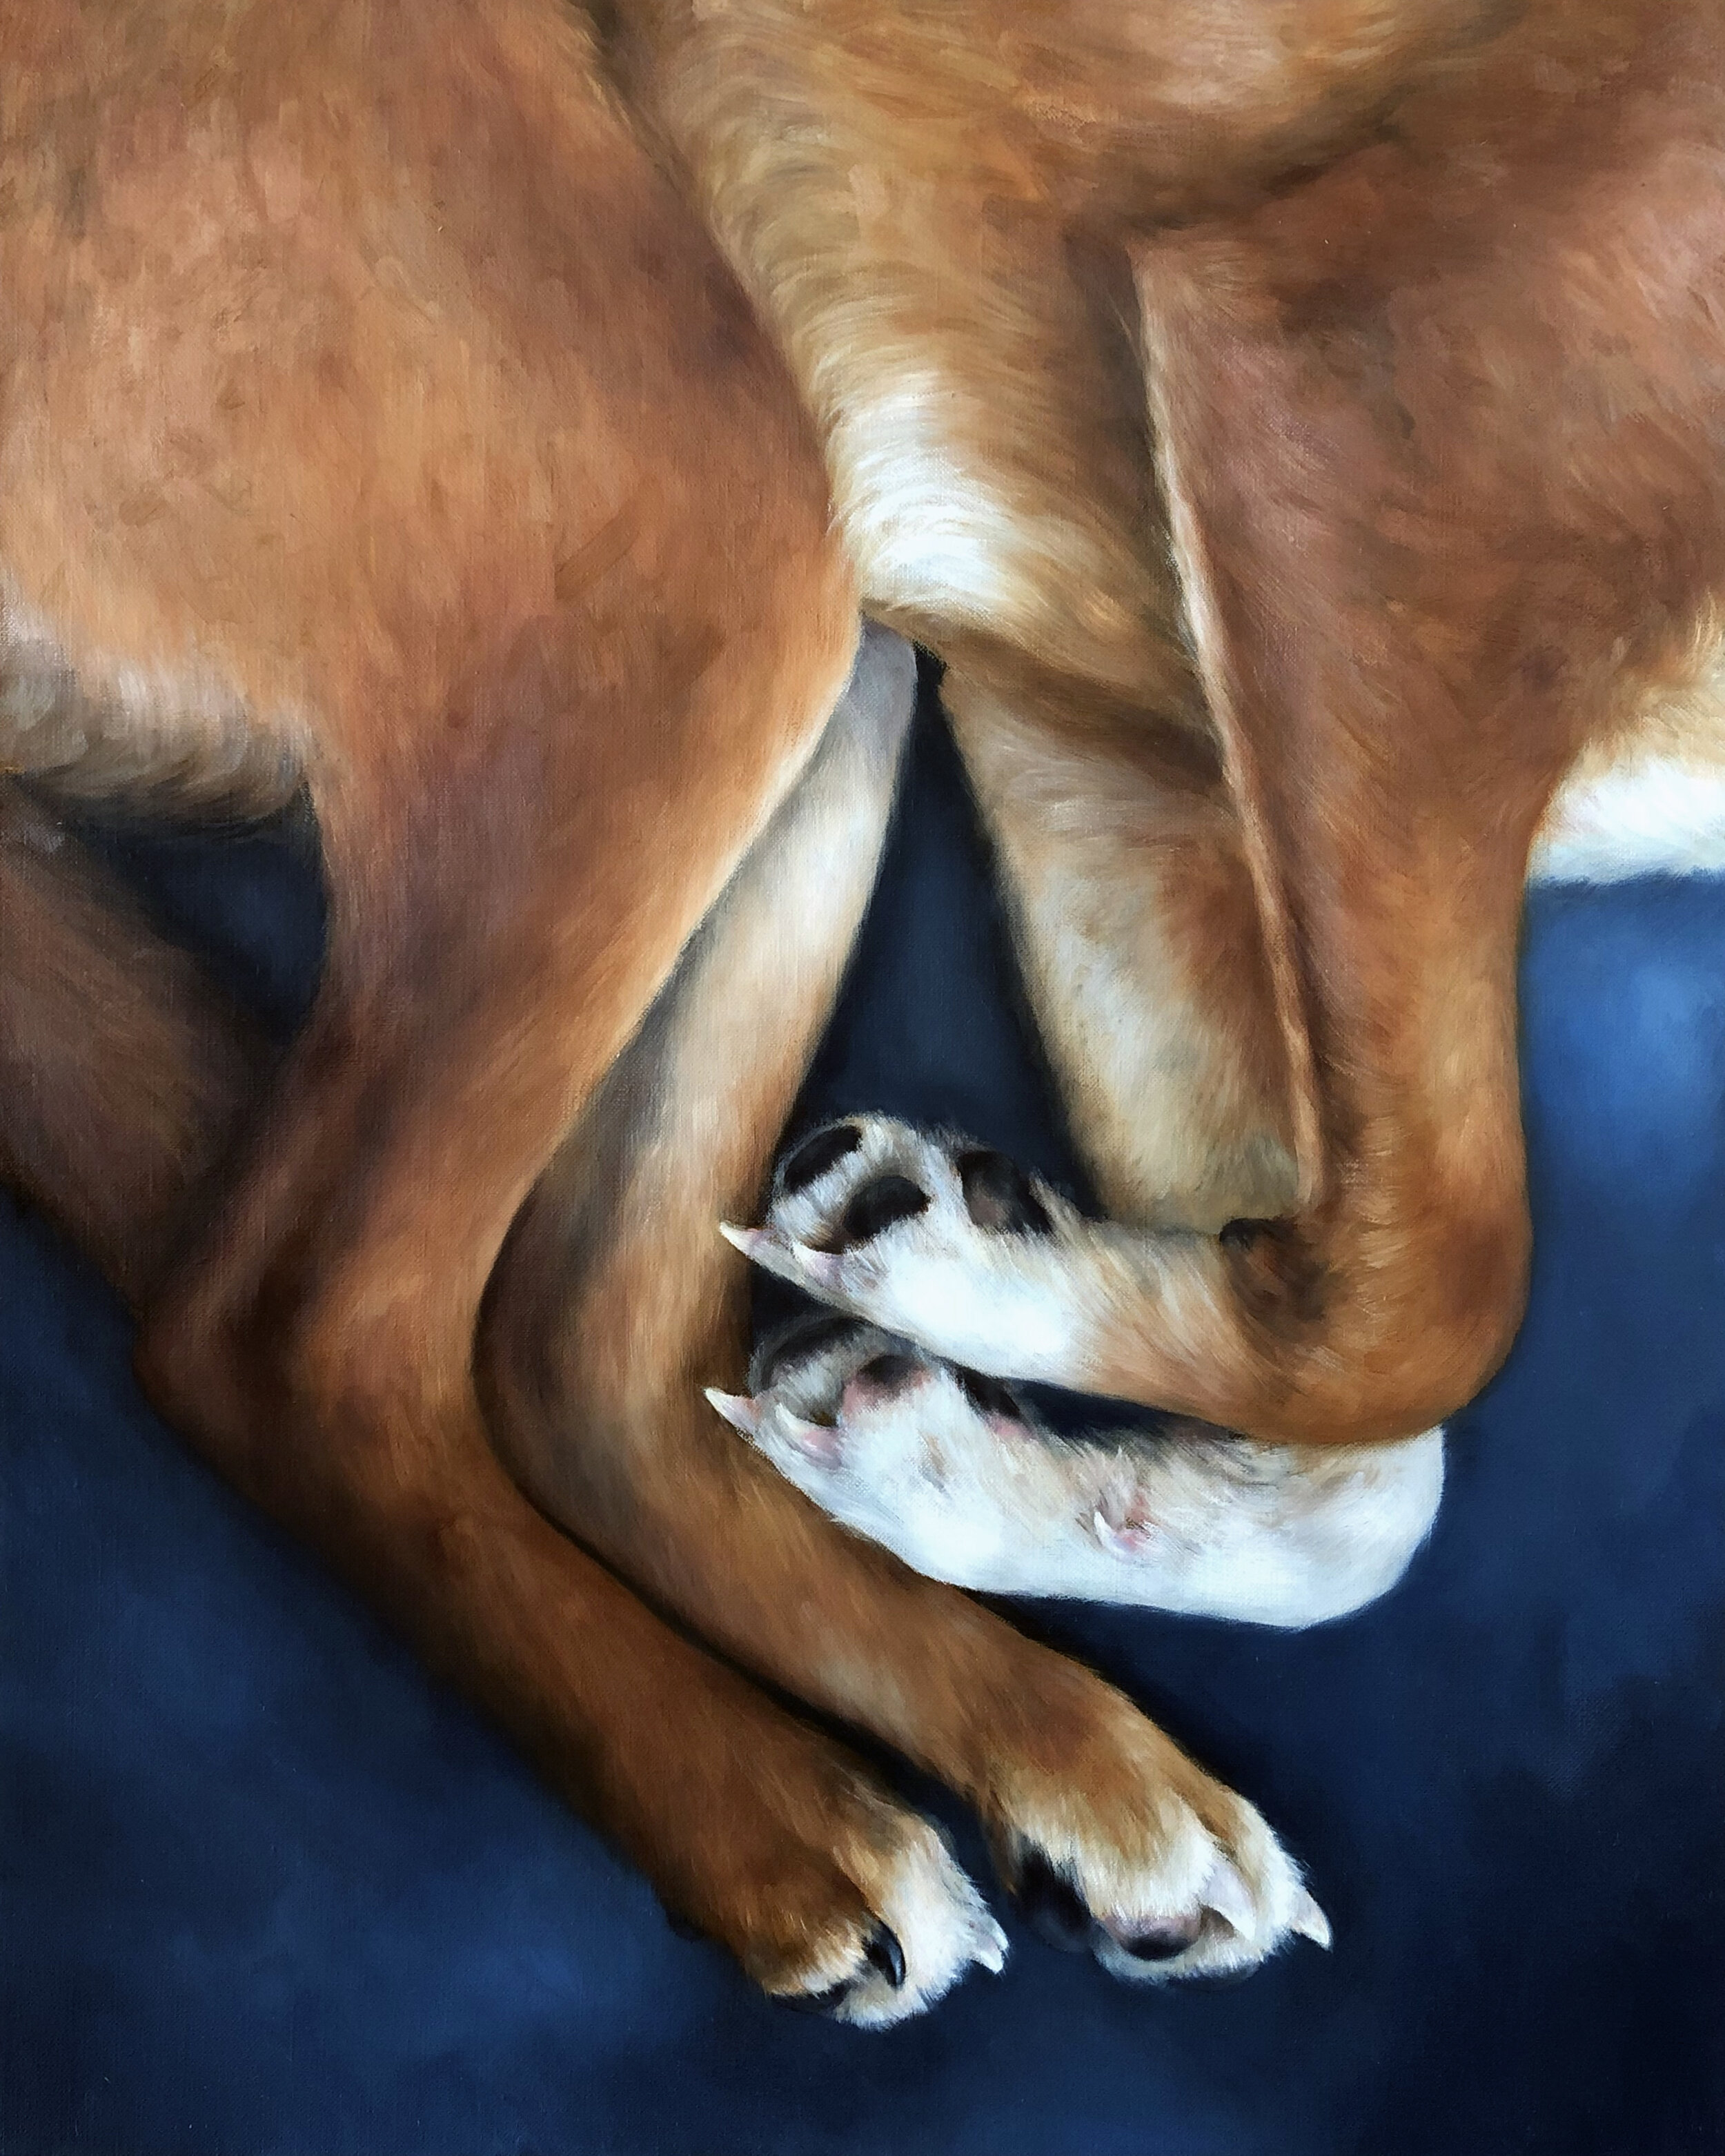   UNTITLED (PAWS)  oil on linen 30” x 24” 2020 